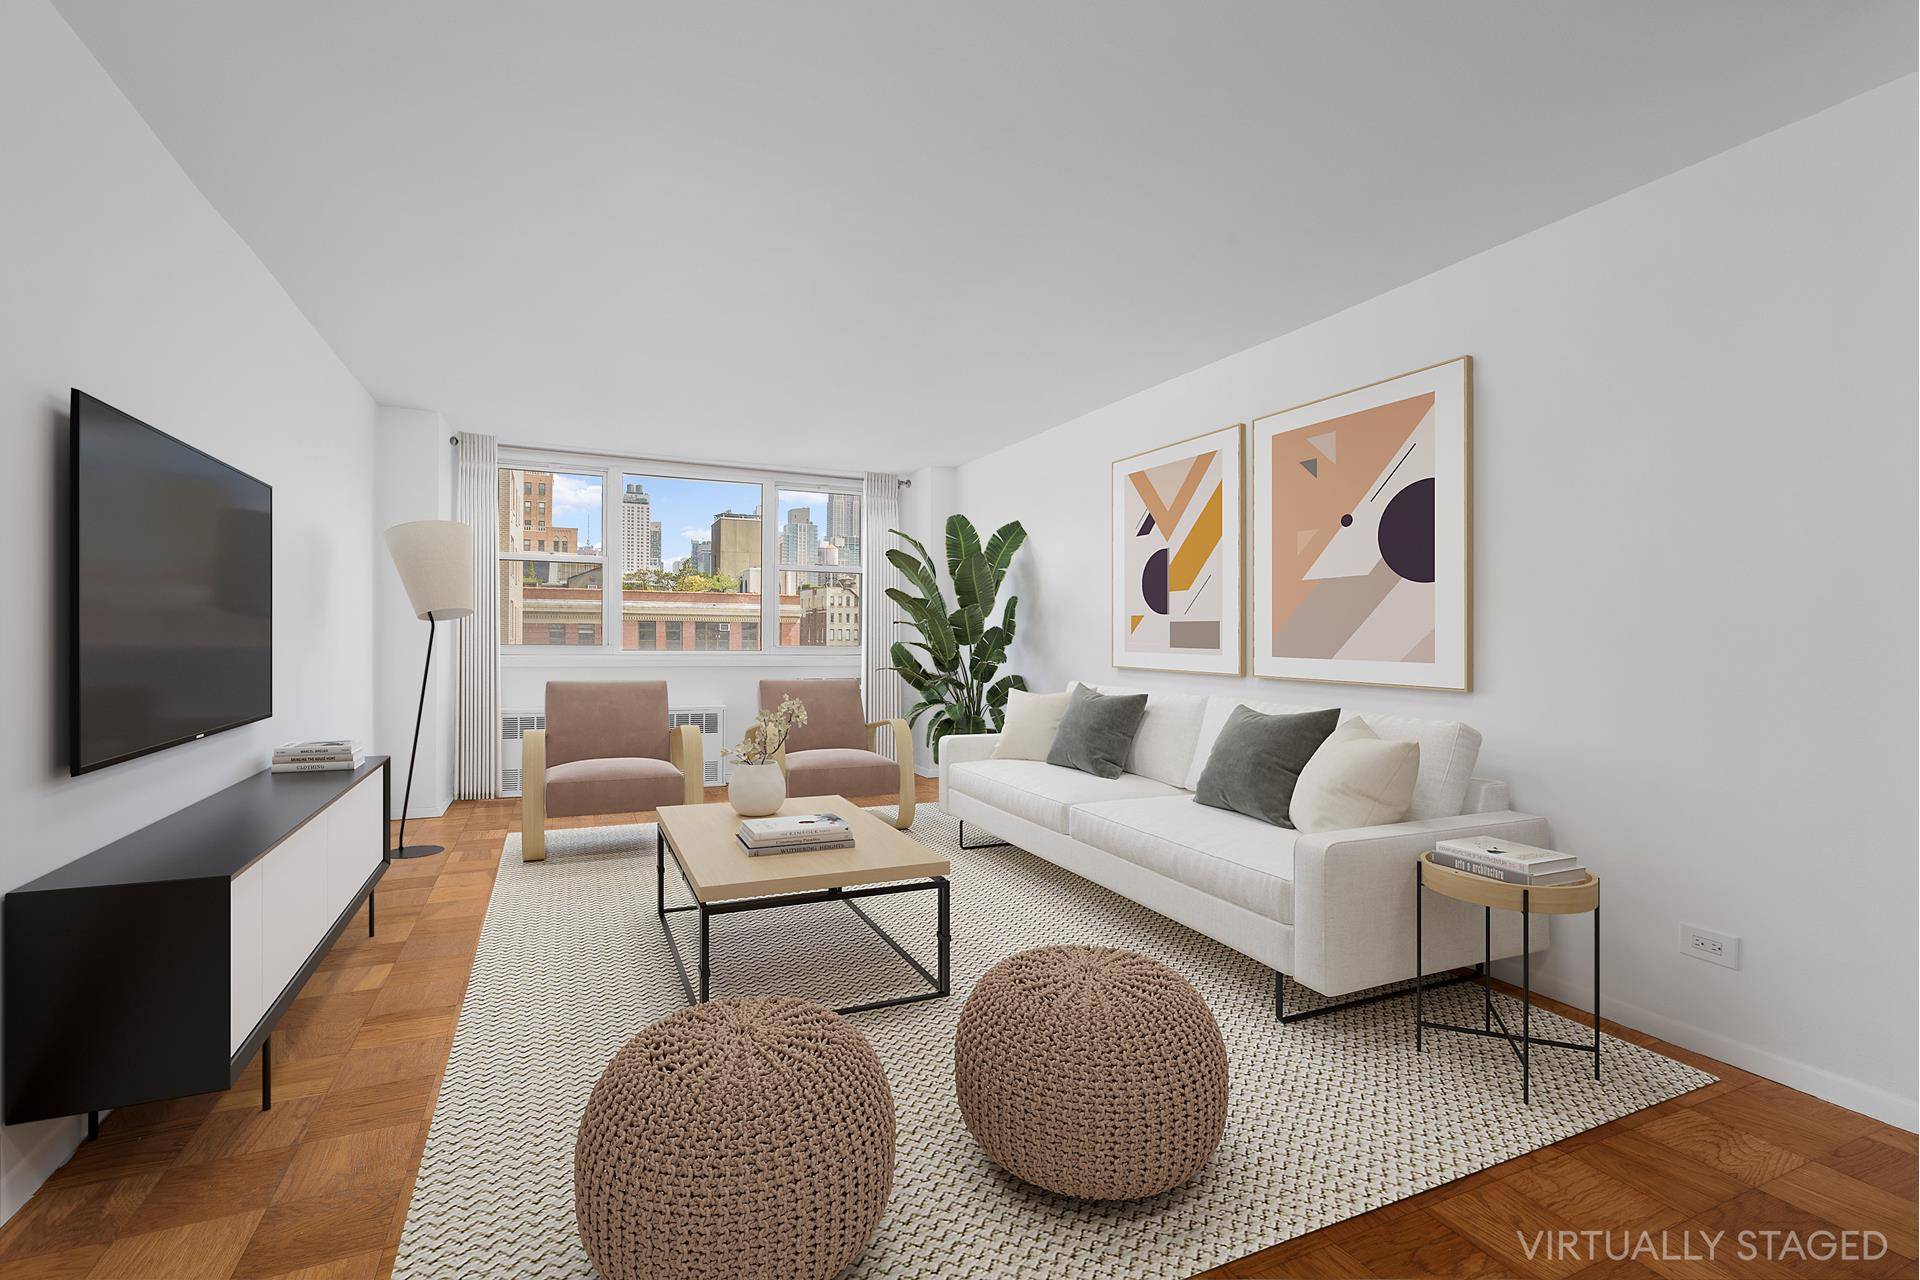 our opportunity awaits to own an oversized one bedroom home at the Vermeer where Chelsea meets the West Village.